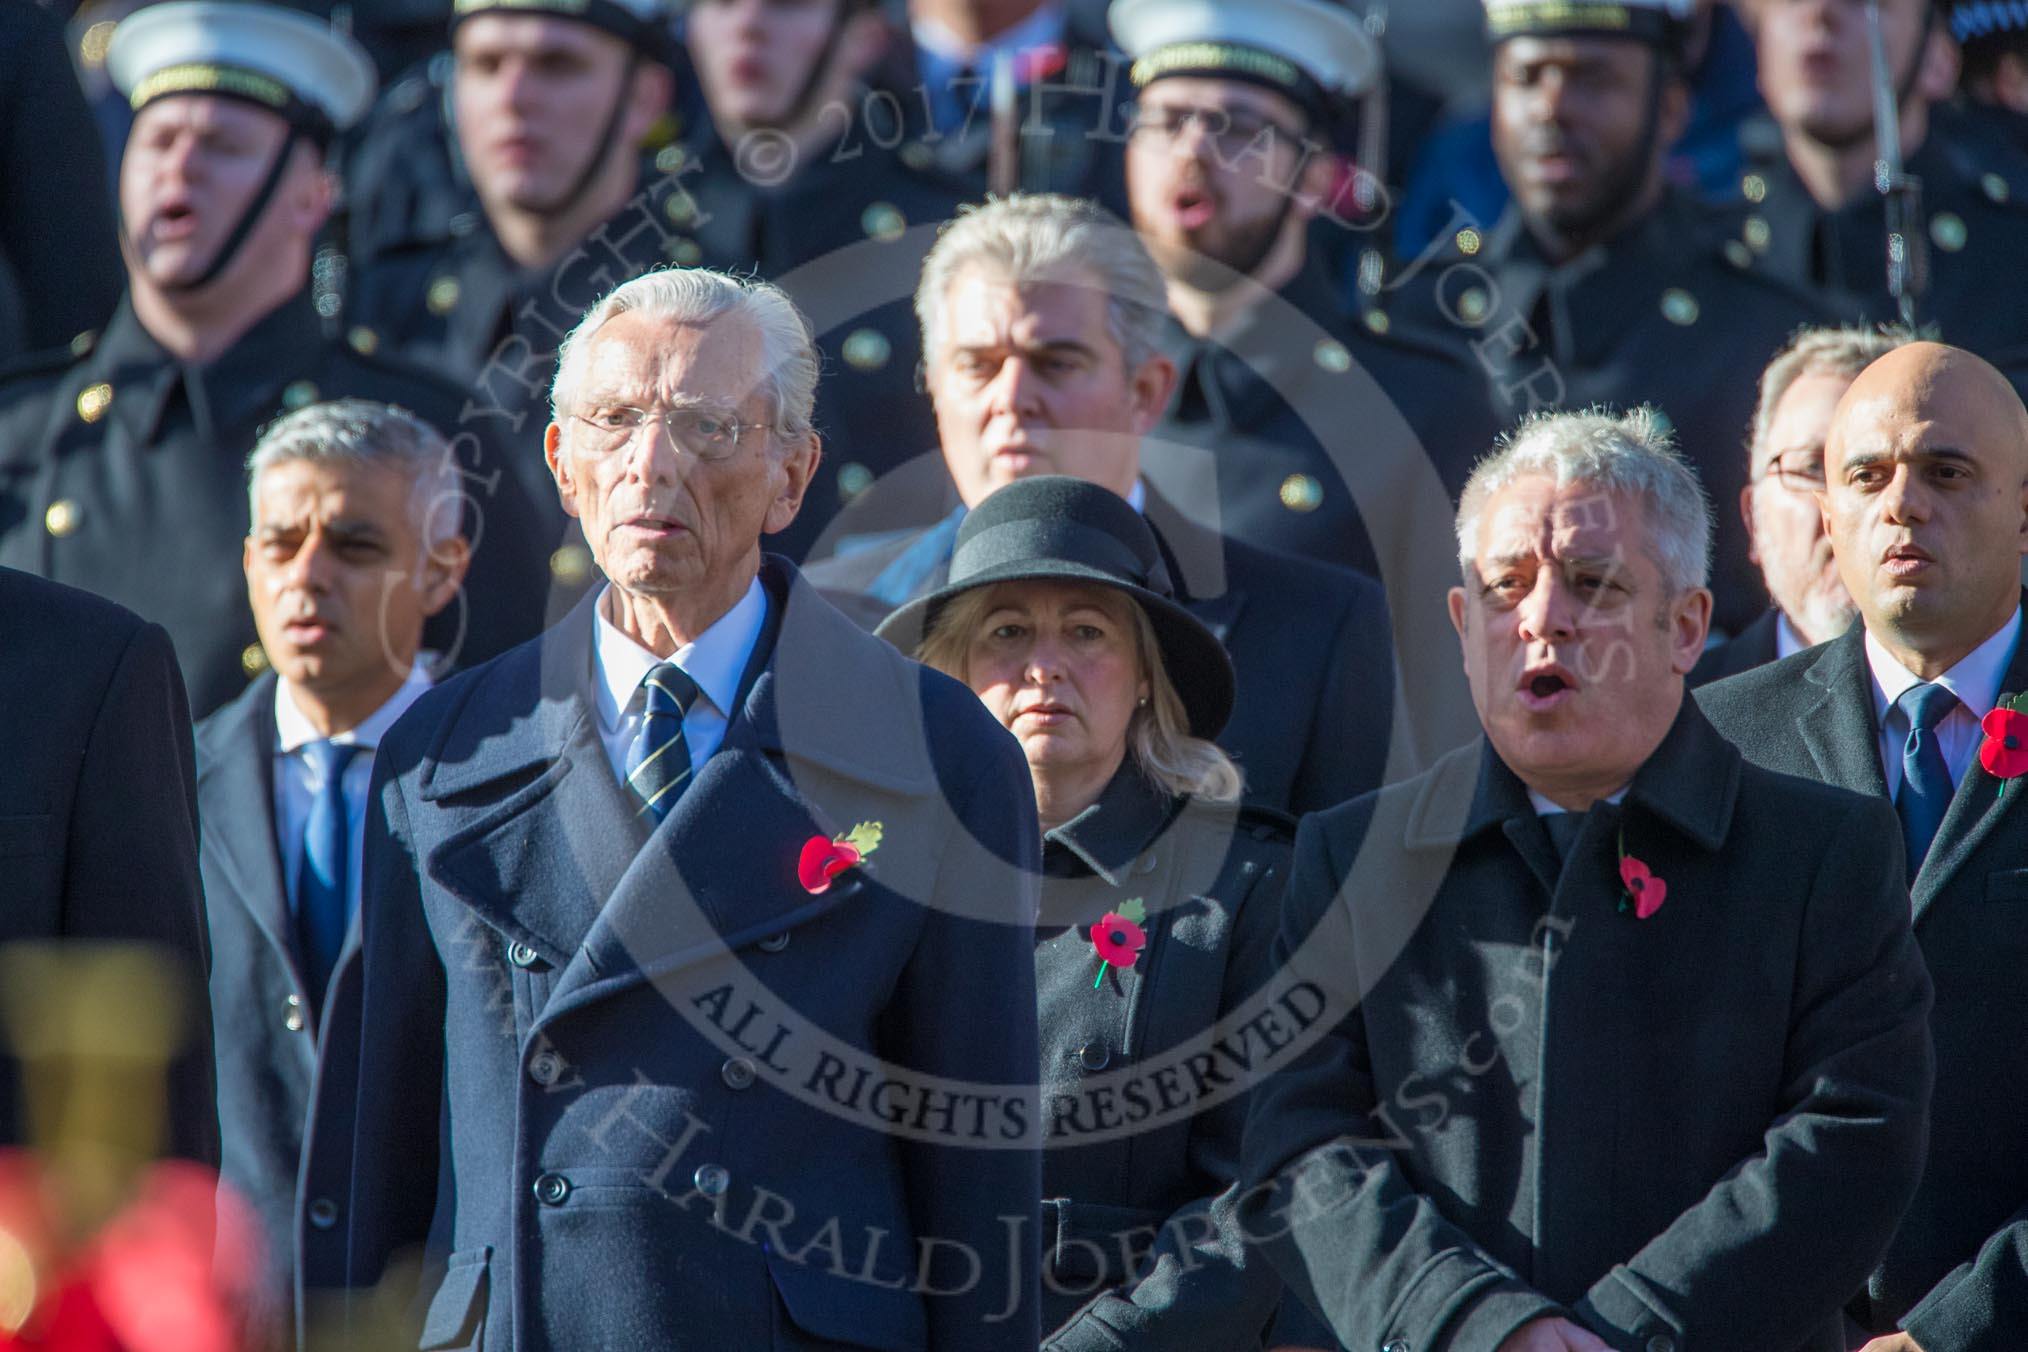 Representatives of the government, and the streetliners, here the Royal Navy, singing during the Remembrance Sunday Cenotaph Ceremony 2018 at Horse Guards Parade, Westminster, London, 11 November 2018, 11:22.